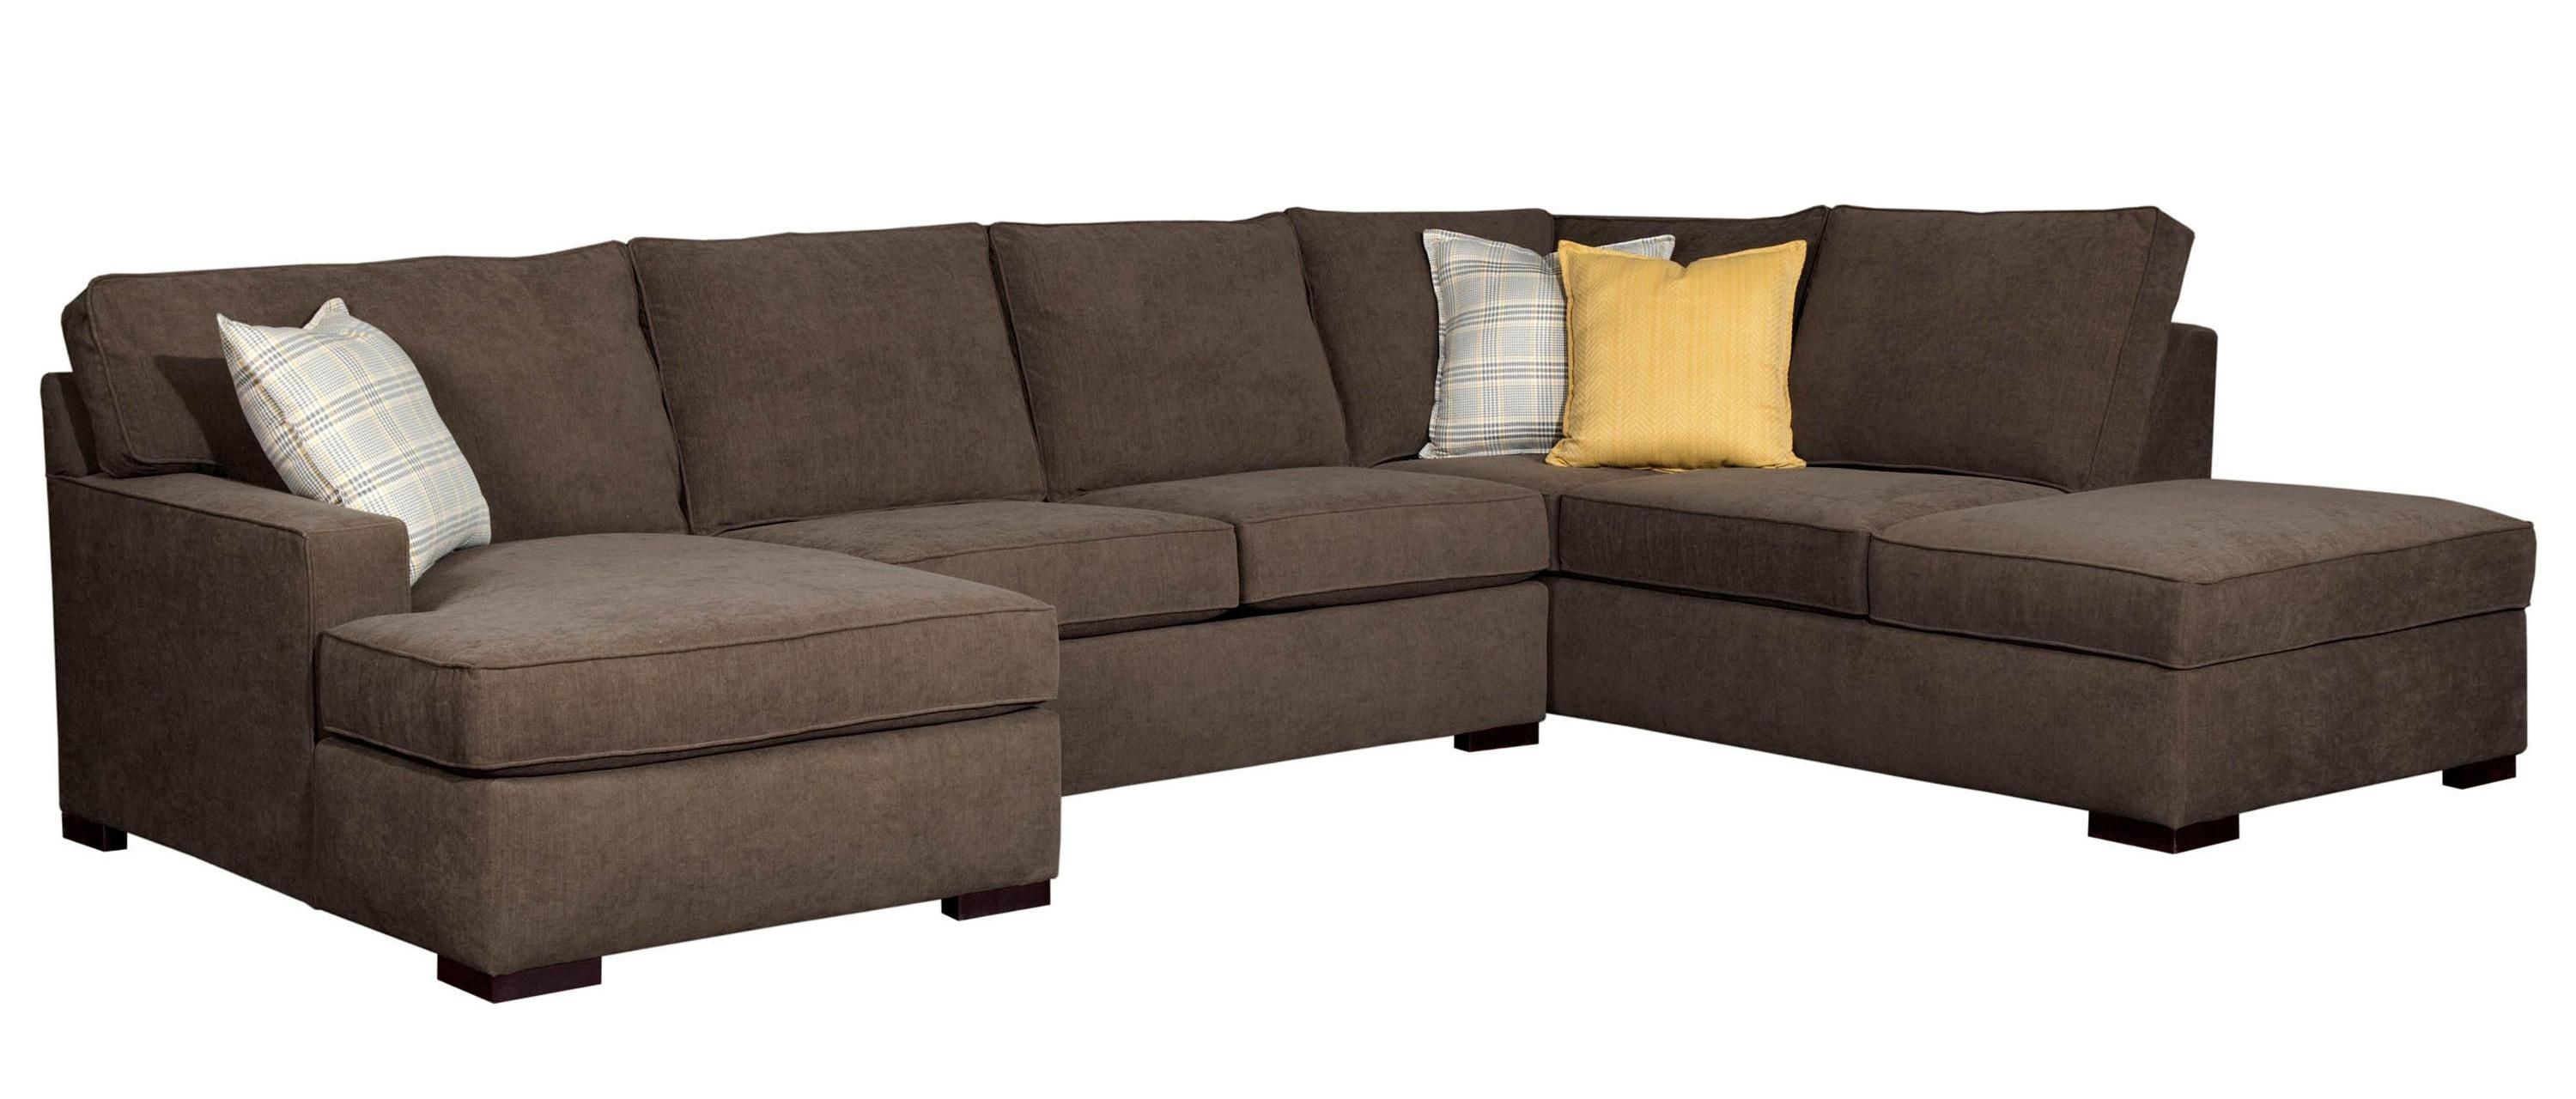 Broyhill Furniture Raphael Contemporary Sectional Sofa With Laf With Regard To Meyer 3 Piece Sectionals With Raf Chaise (View 14 of 30)